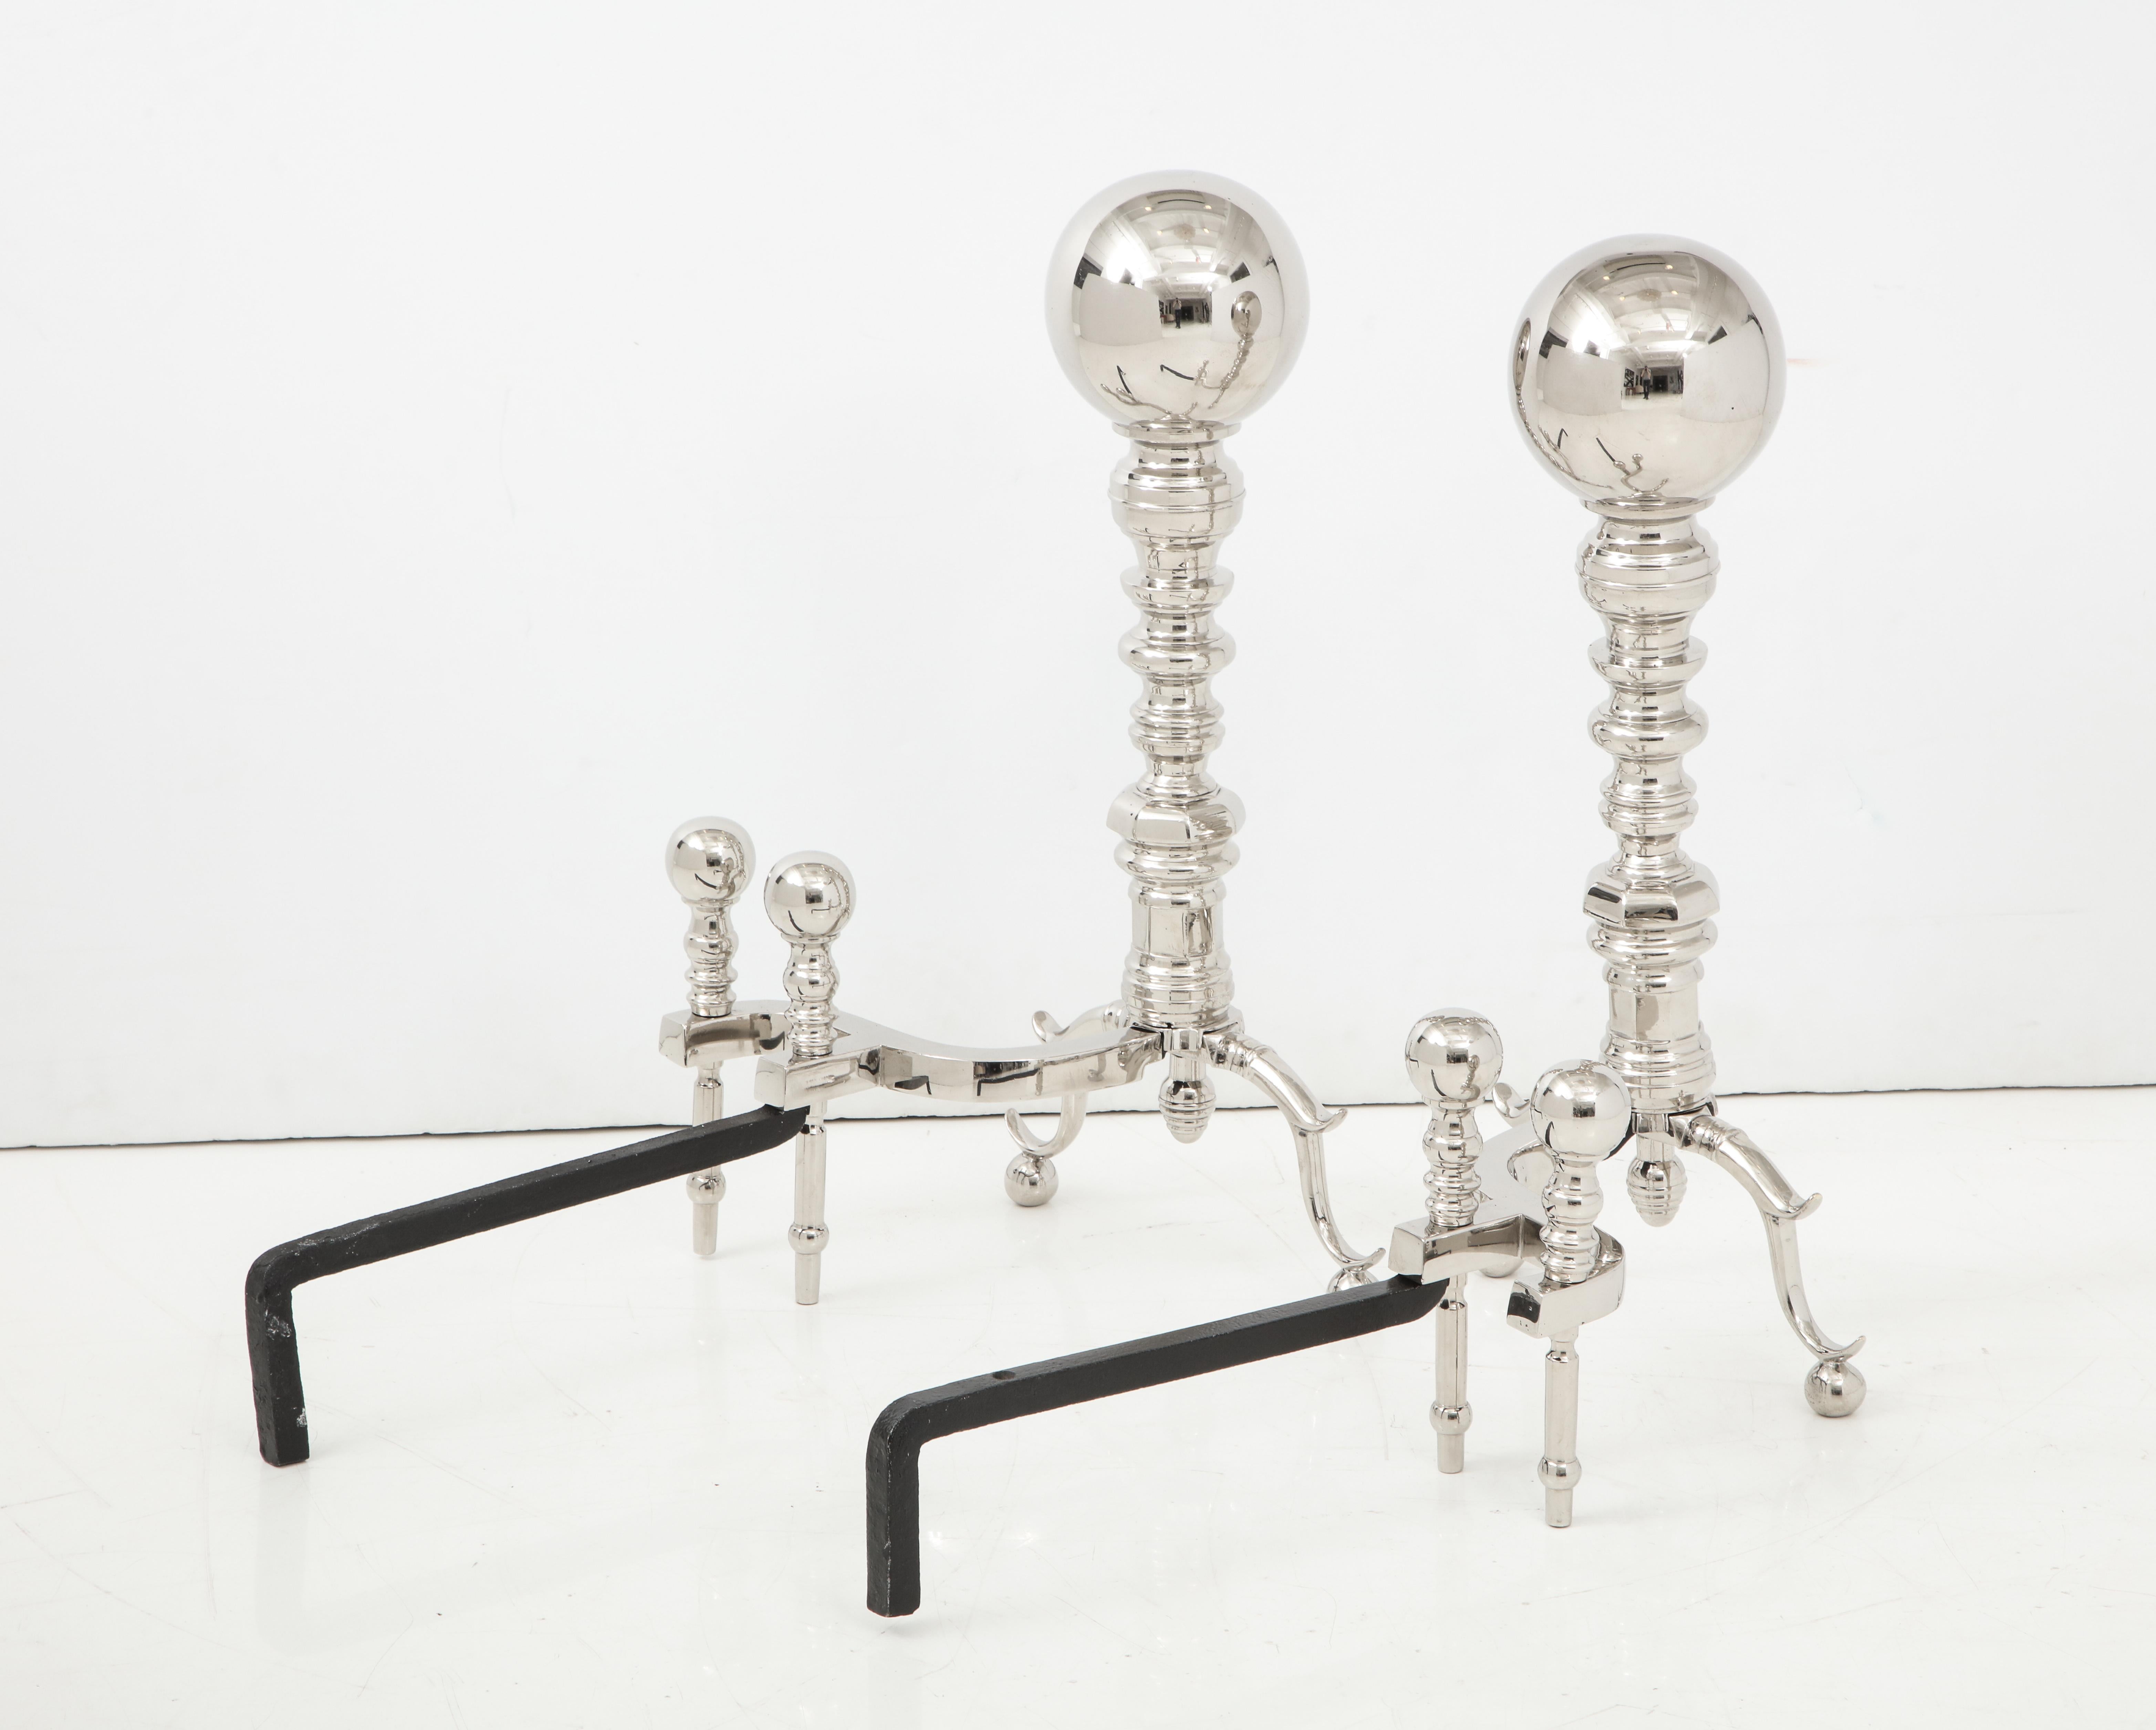 Hollywood Regency Grand Scale Polished Nickel Cannonball Andirons